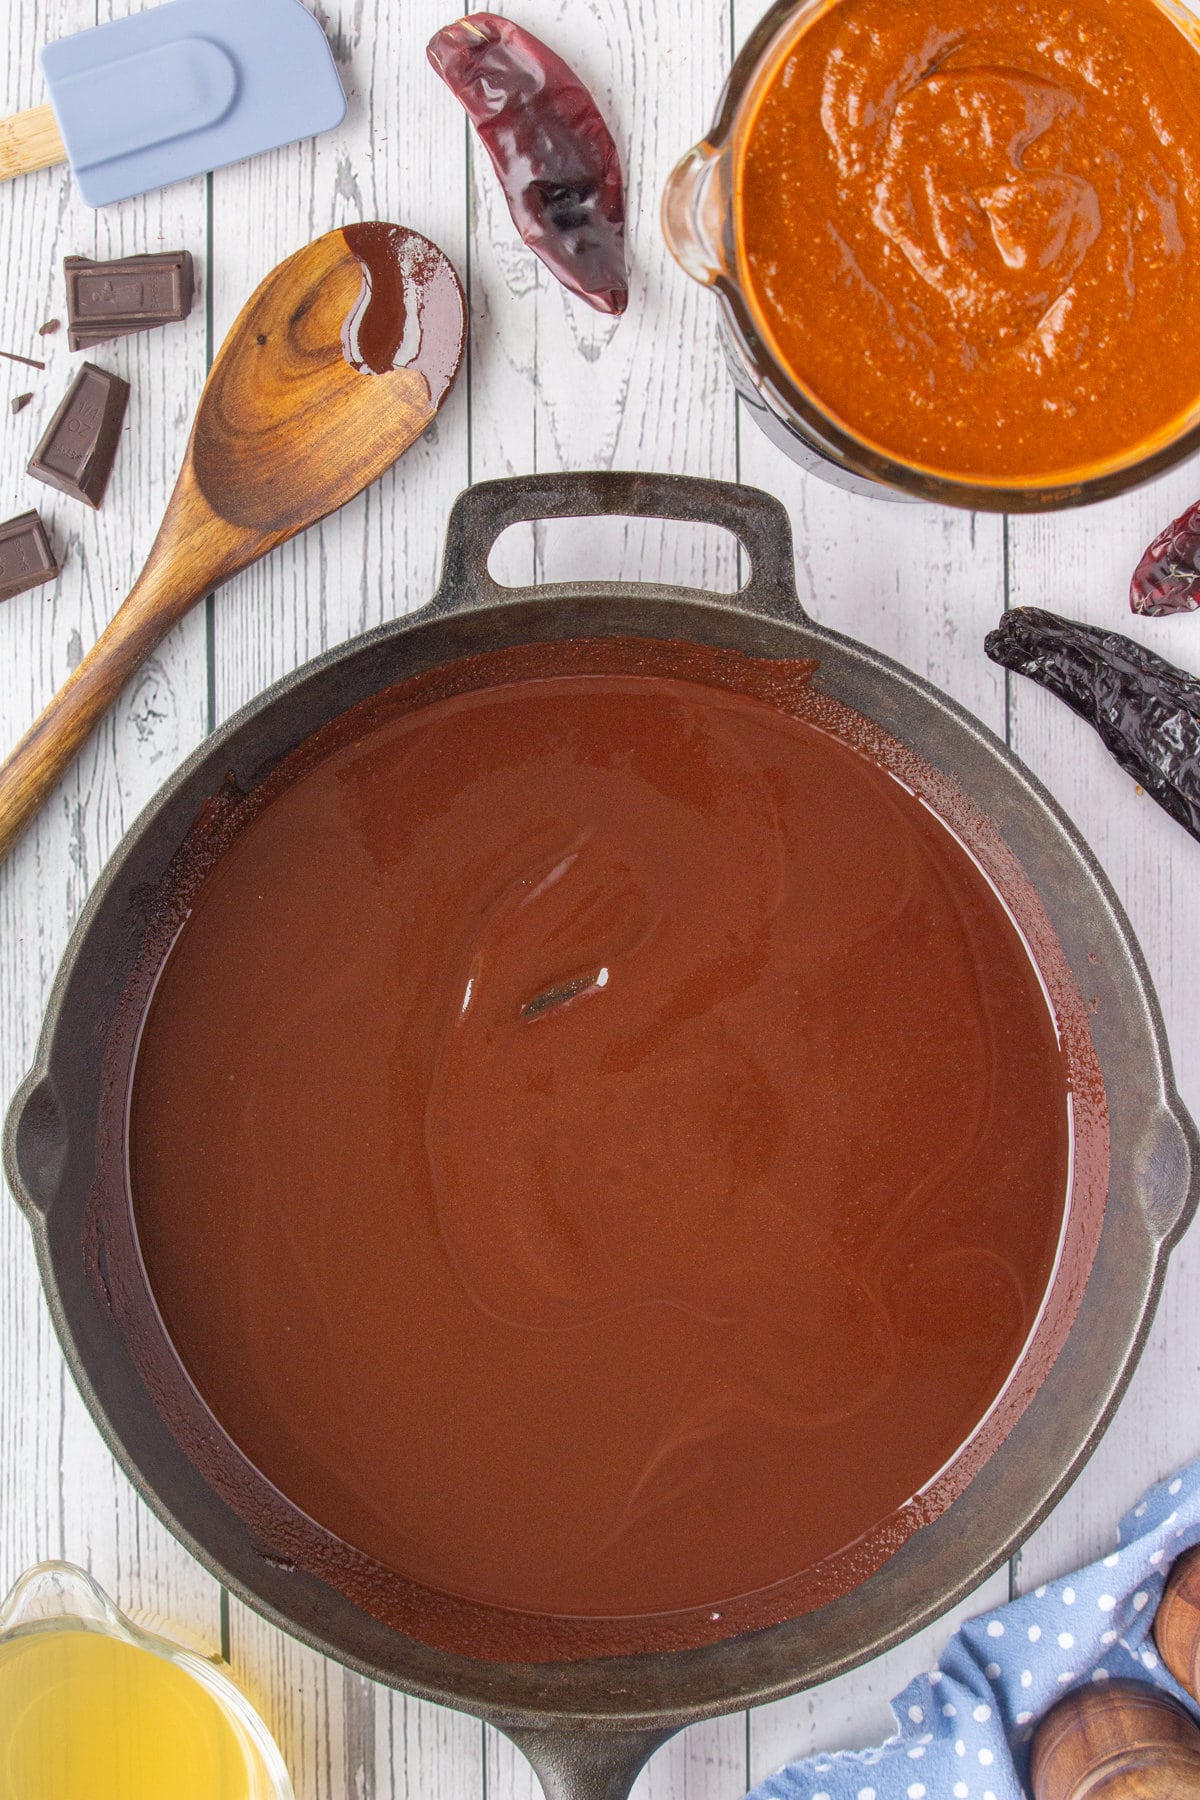 The chocolate and chile have been melted and stirred together.